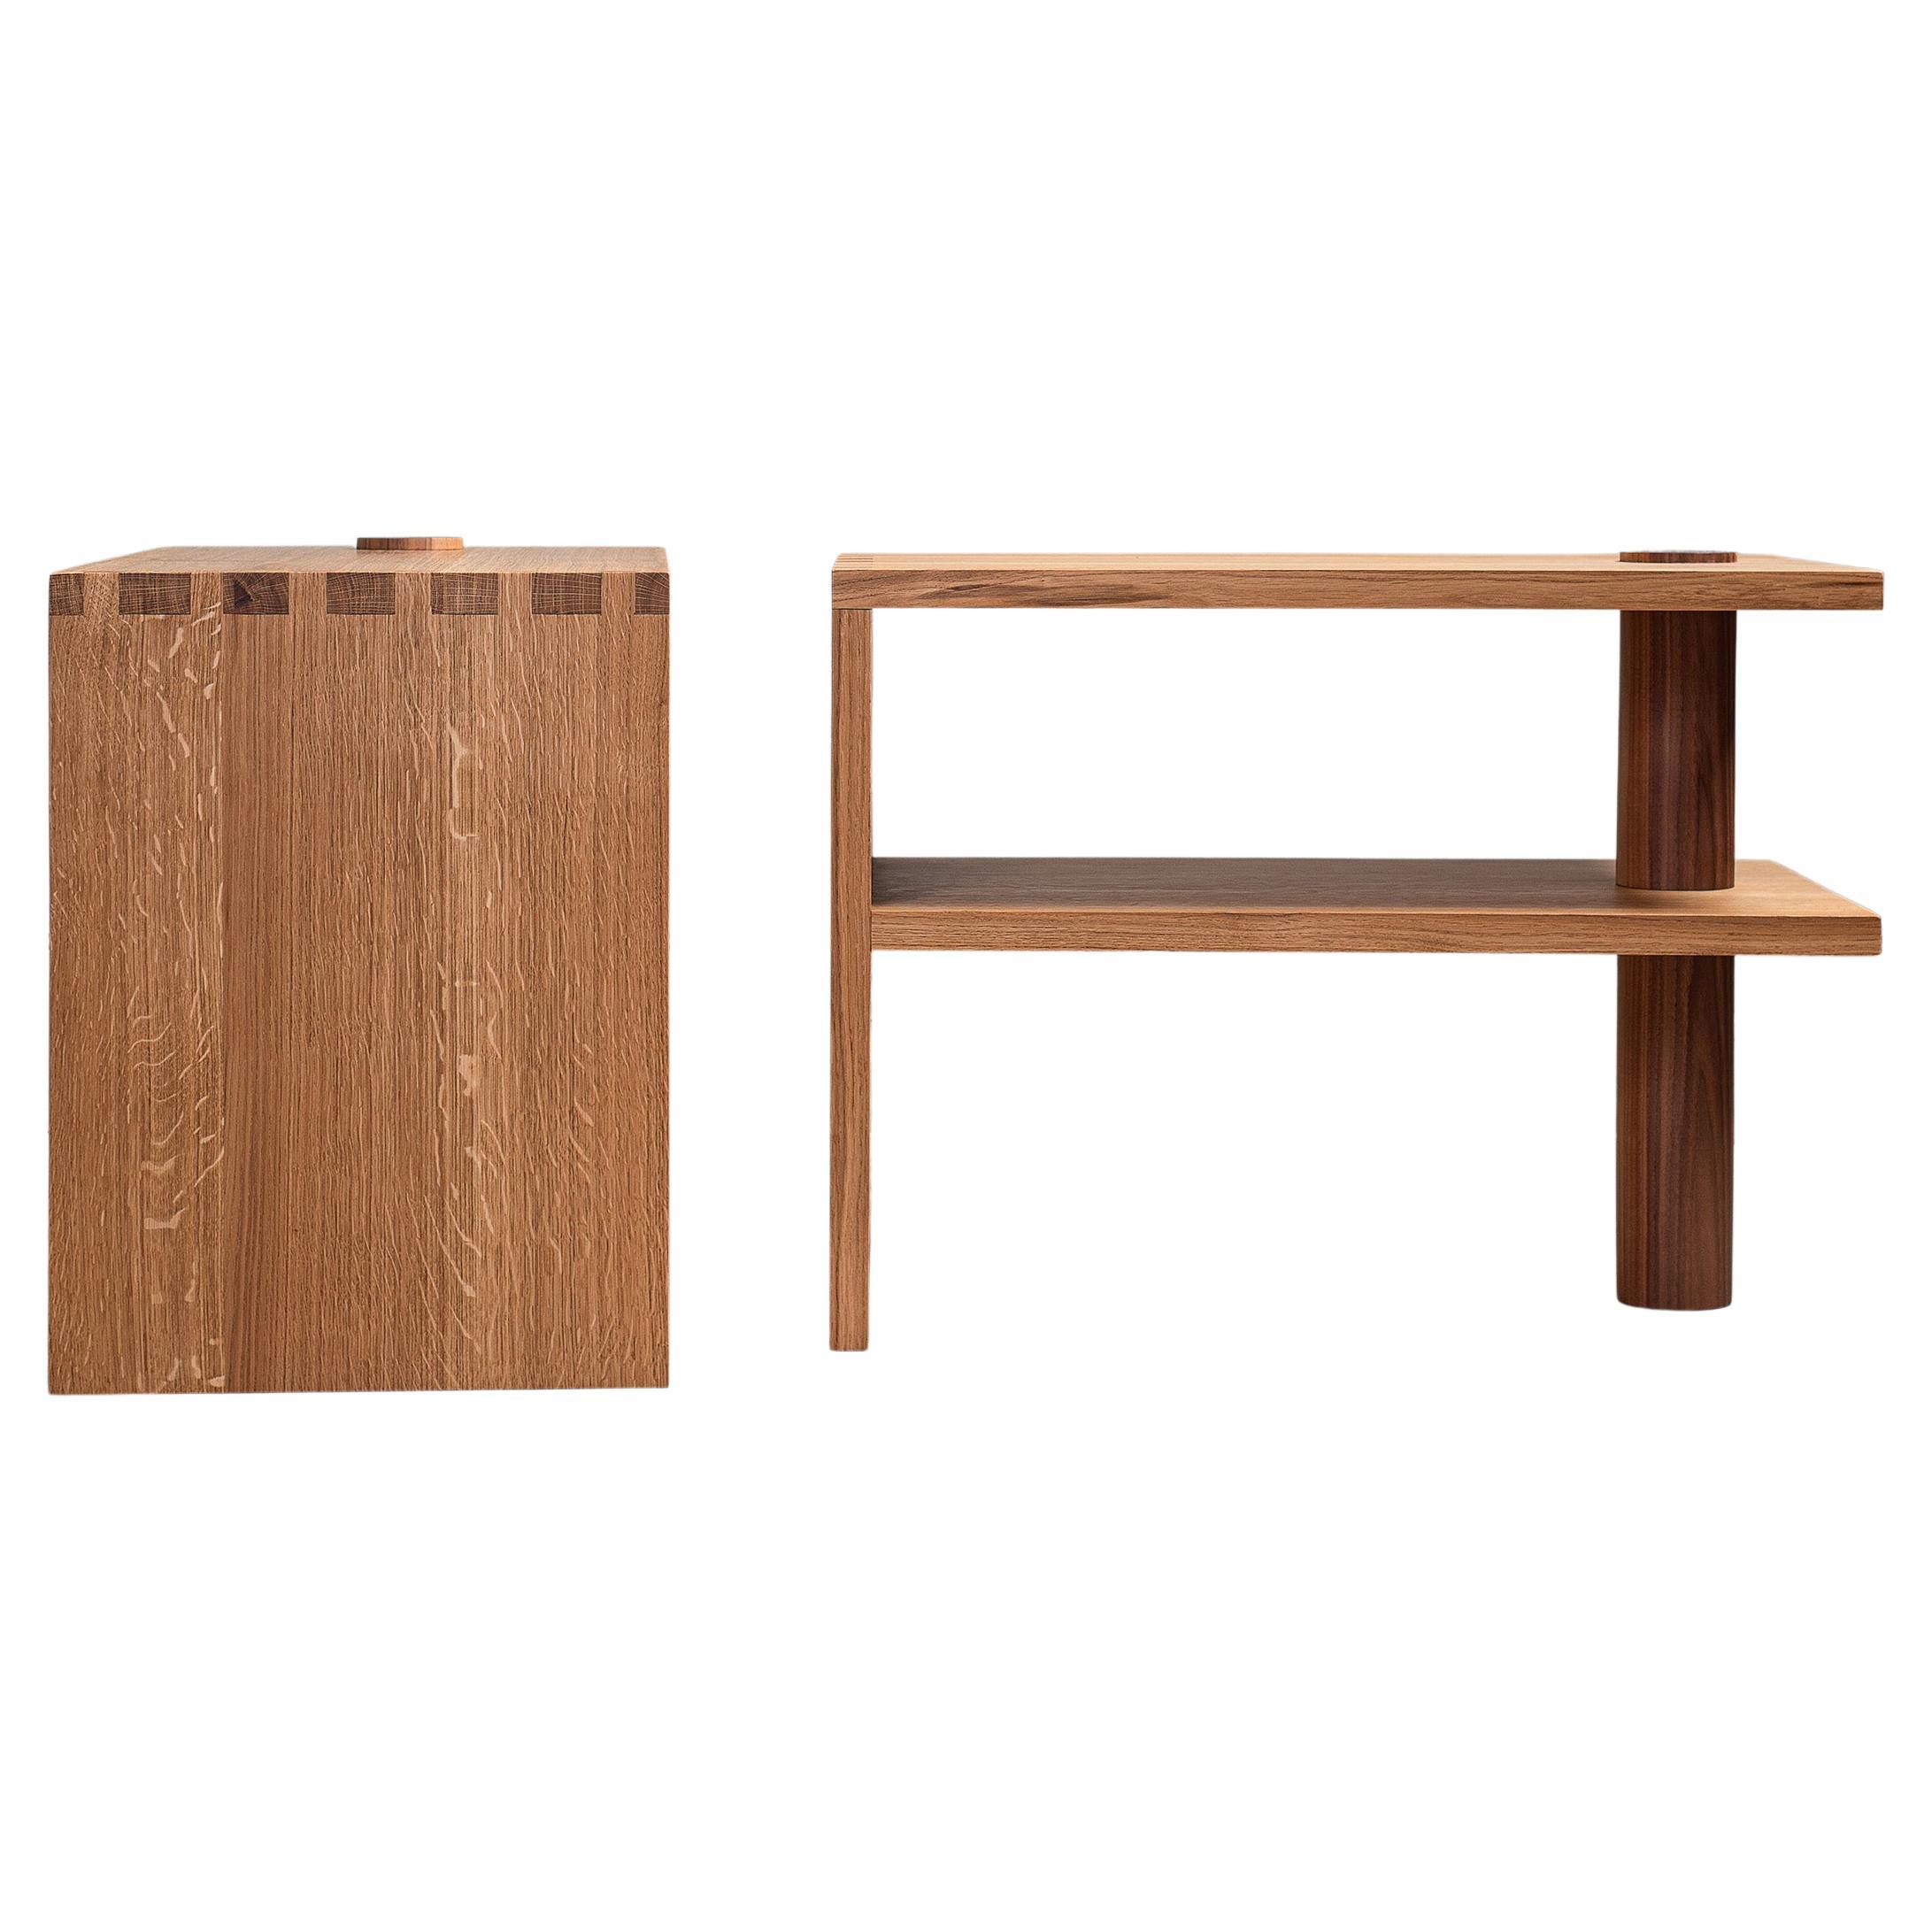 Monumental Handcrafted Oak & Walnut Night Stands, End Tables For Sale